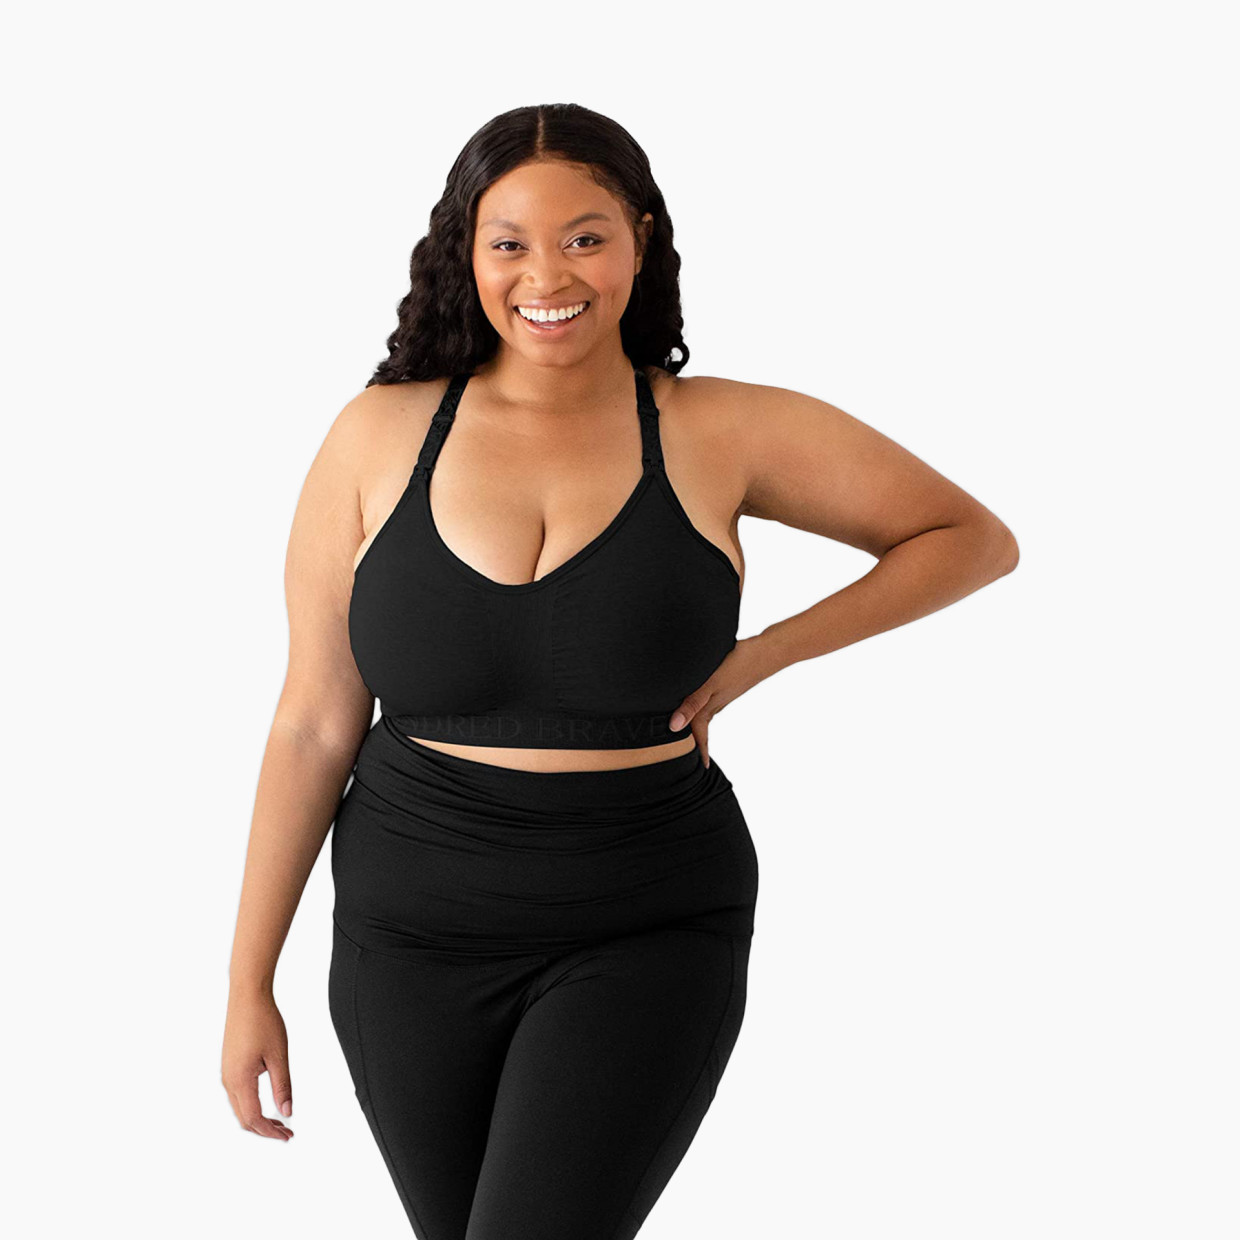 Kindred Bravely Sublime Support Low Impact Nursing & Maternity Sports Bra - Black, Small-Busty.